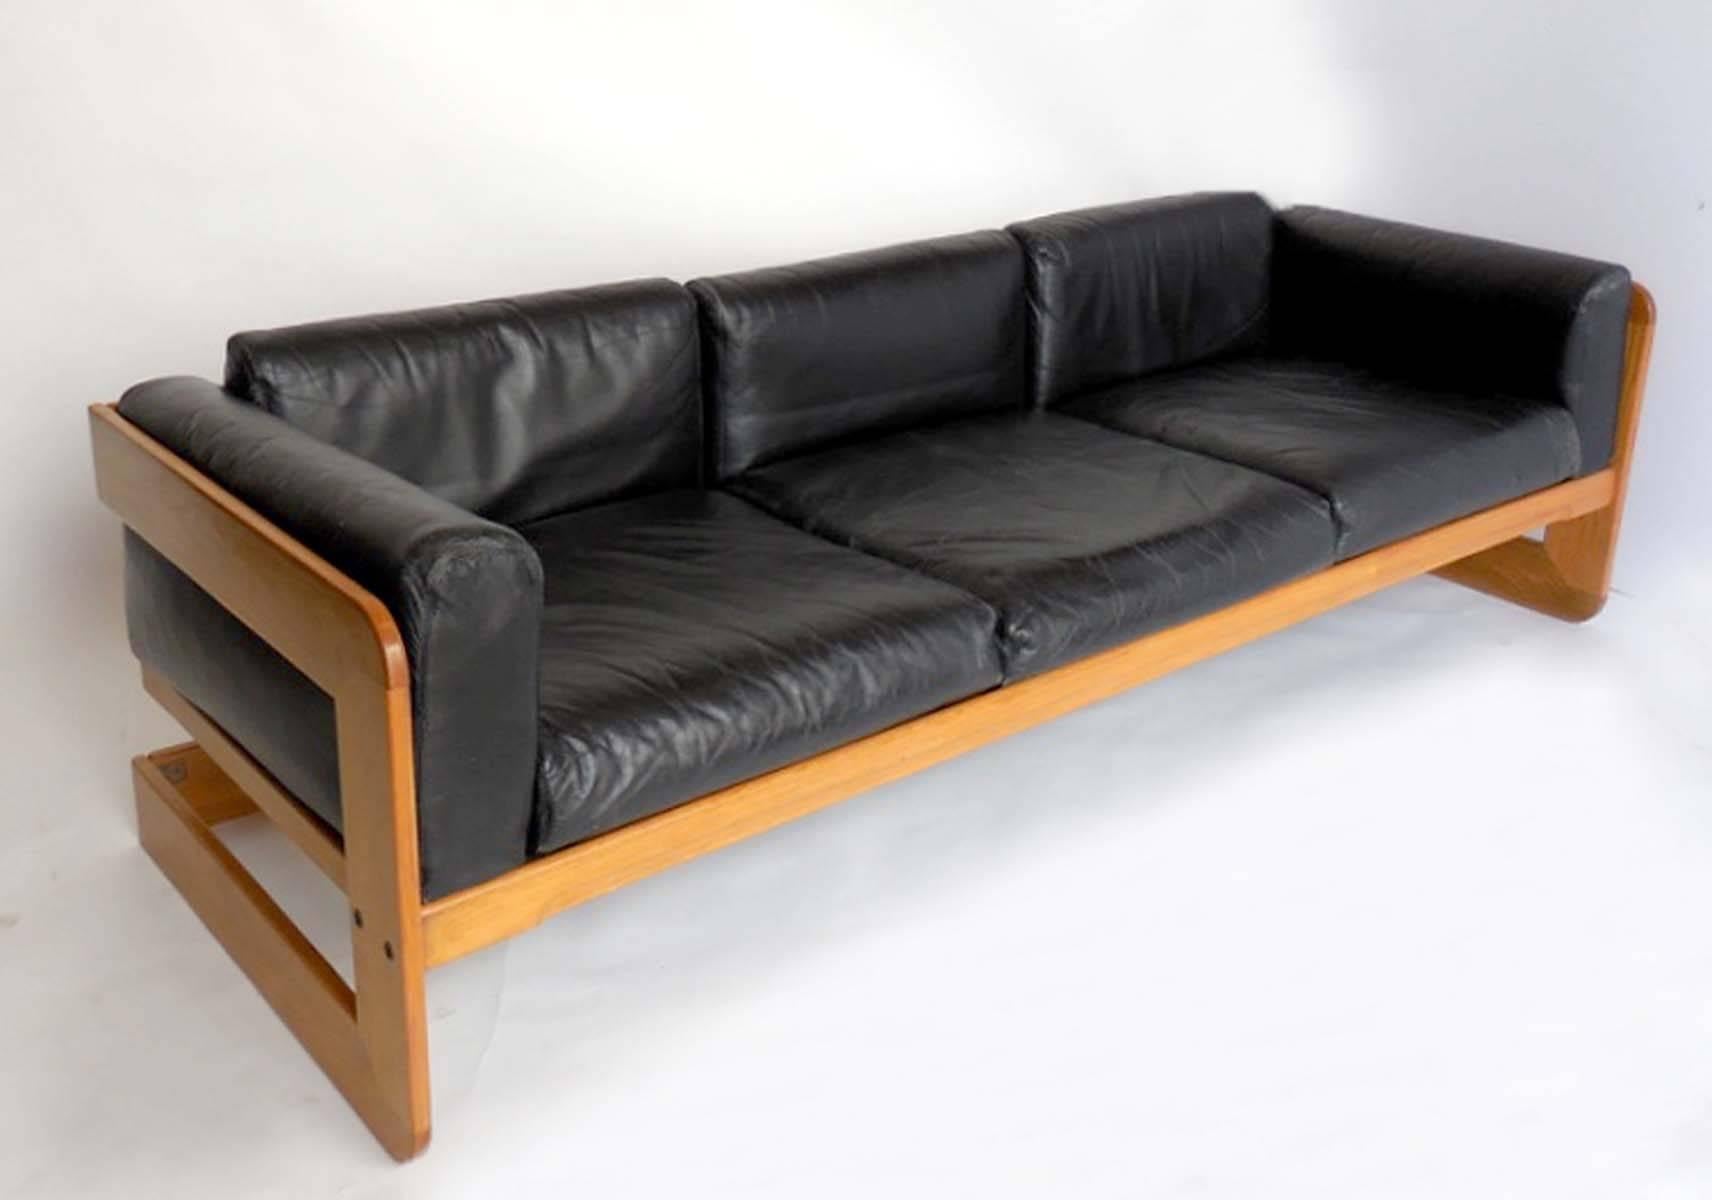 Designed in the 1970s by Guiseppi Raimondo for Stendig. 
Simple, modern and functional. Oak and leather.
Sofa measures 85